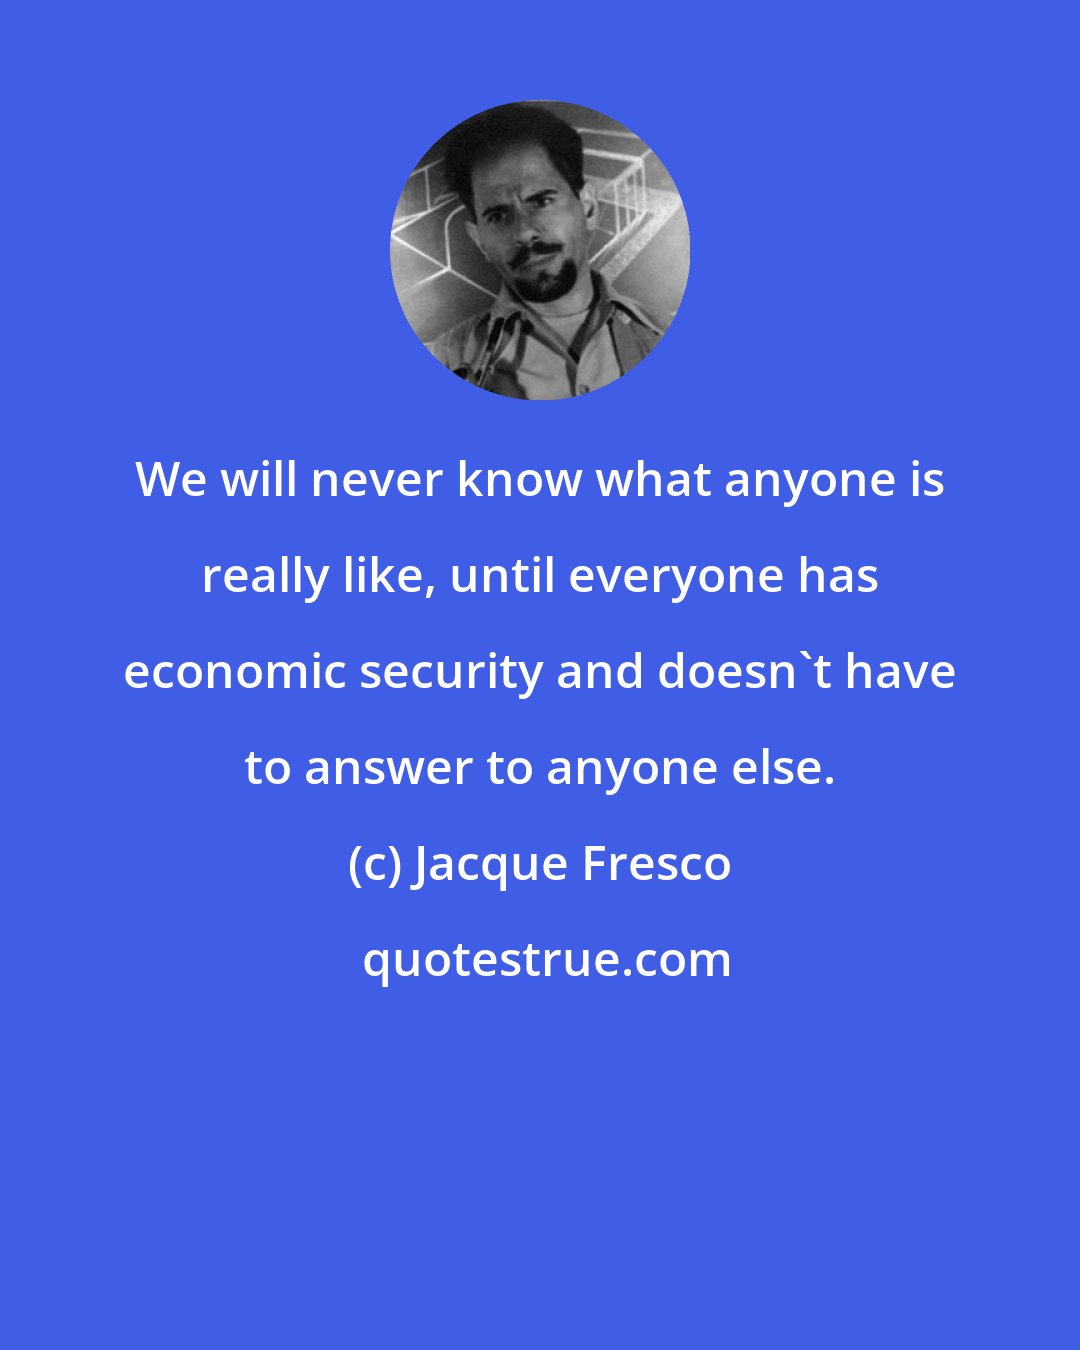 Jacque Fresco: We will never know what anyone is really like, until everyone has economic security and doesn't have to answer to anyone else.